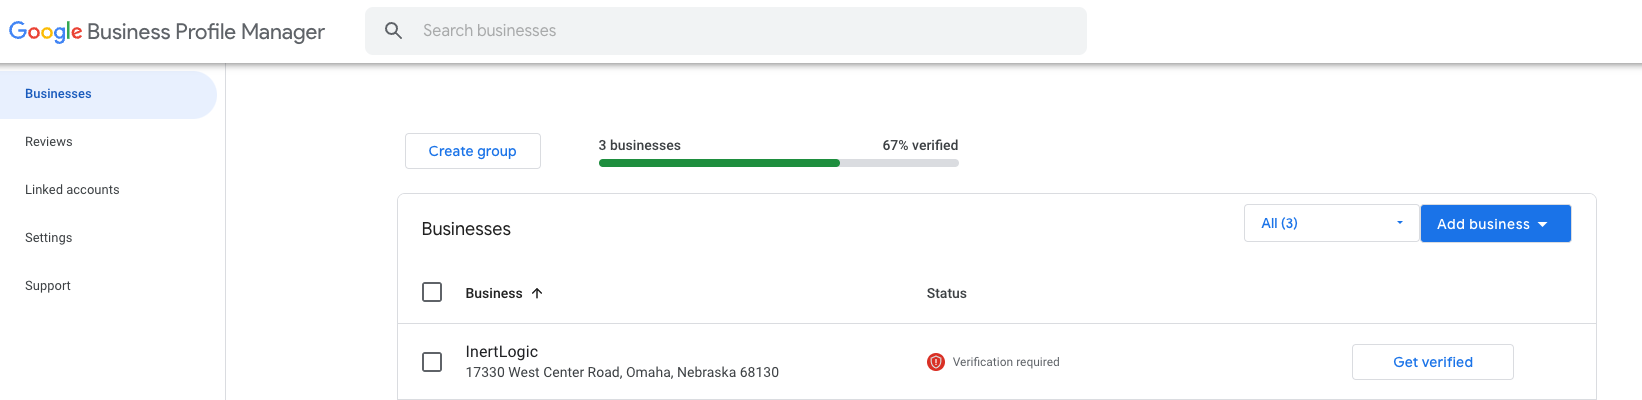 Screenshot of Google Business Profile manager with verification required status for IntertLogic